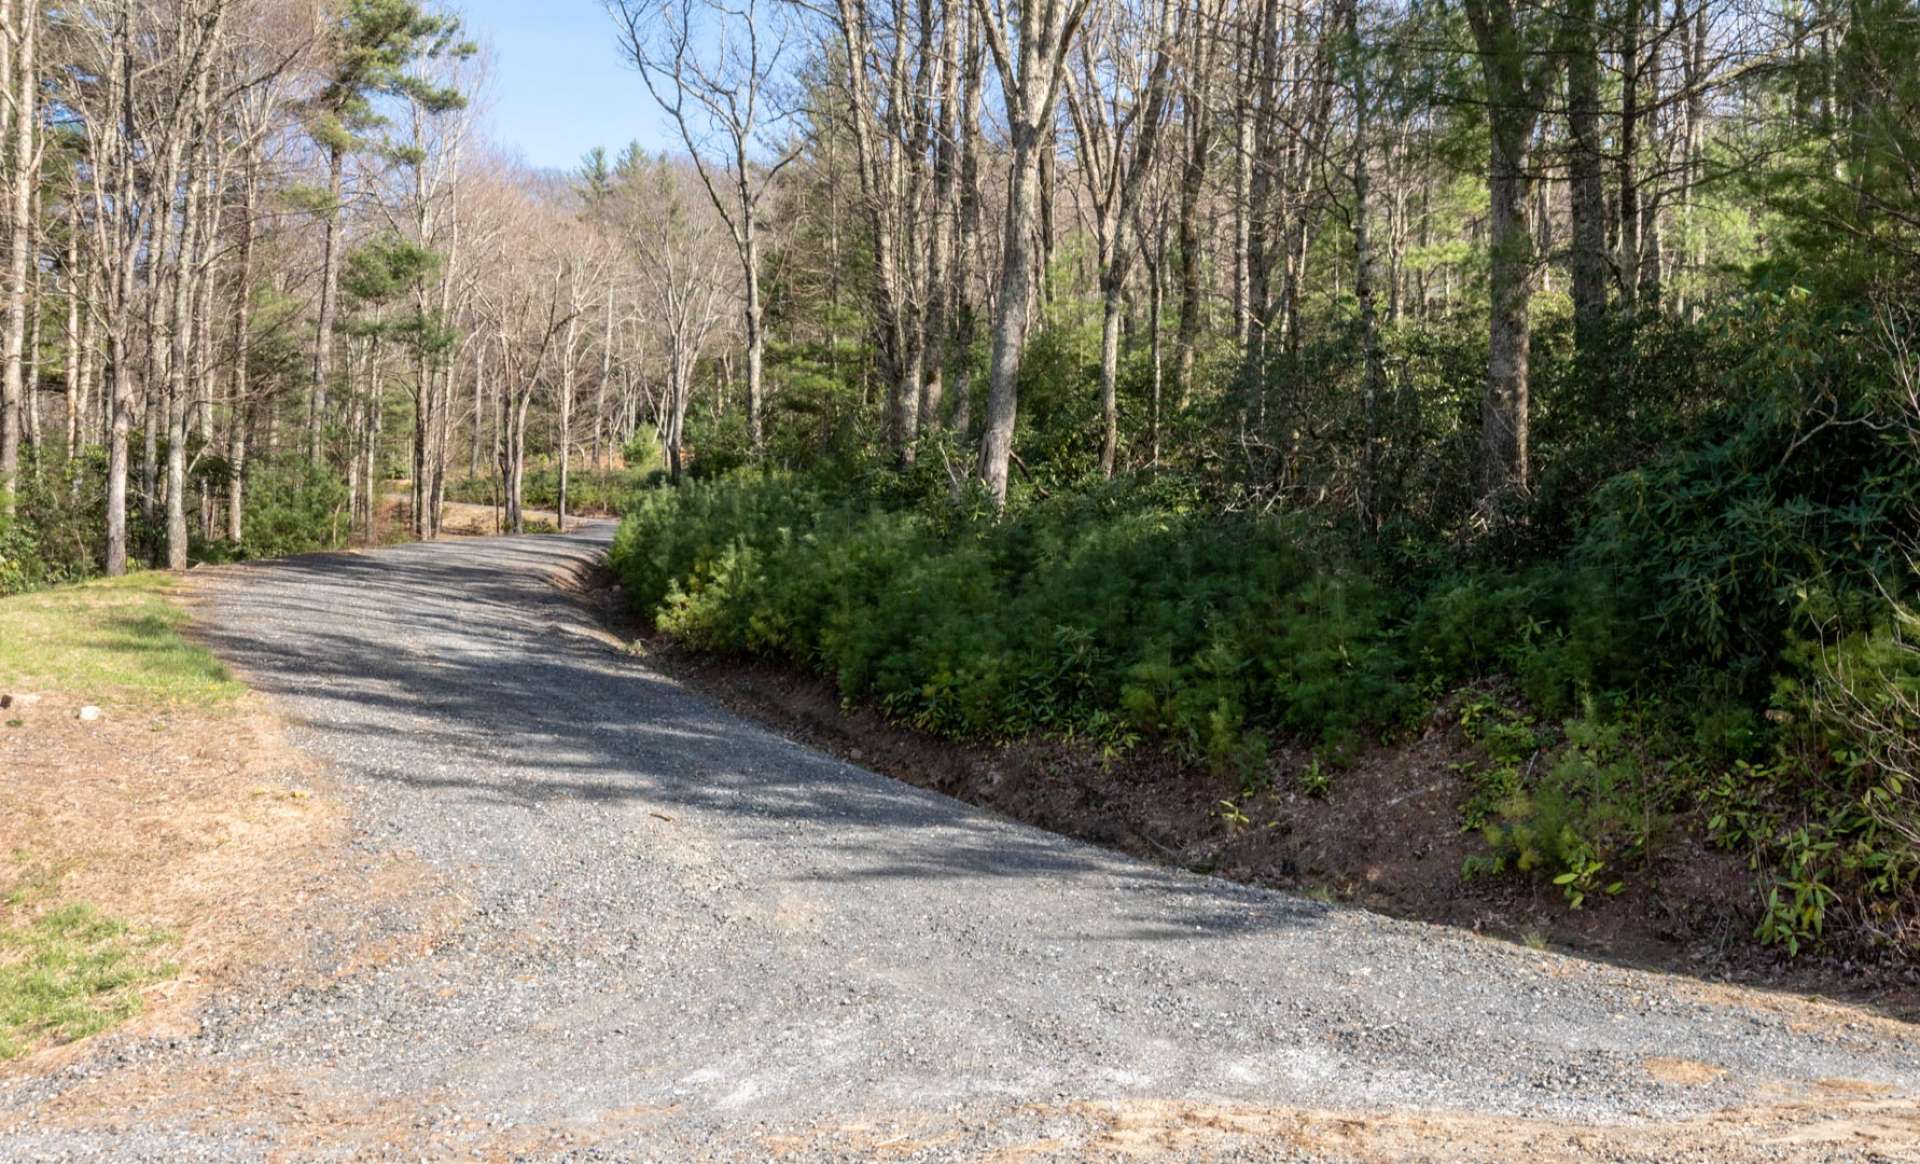 Lot 1 is offered at $22,500, and awaits your choice of cabin  or home construction.  There are 4 lots available.  Purchase all 4 homesites for a discounted price.  Call for details on listing J226.  *Broker Interest.